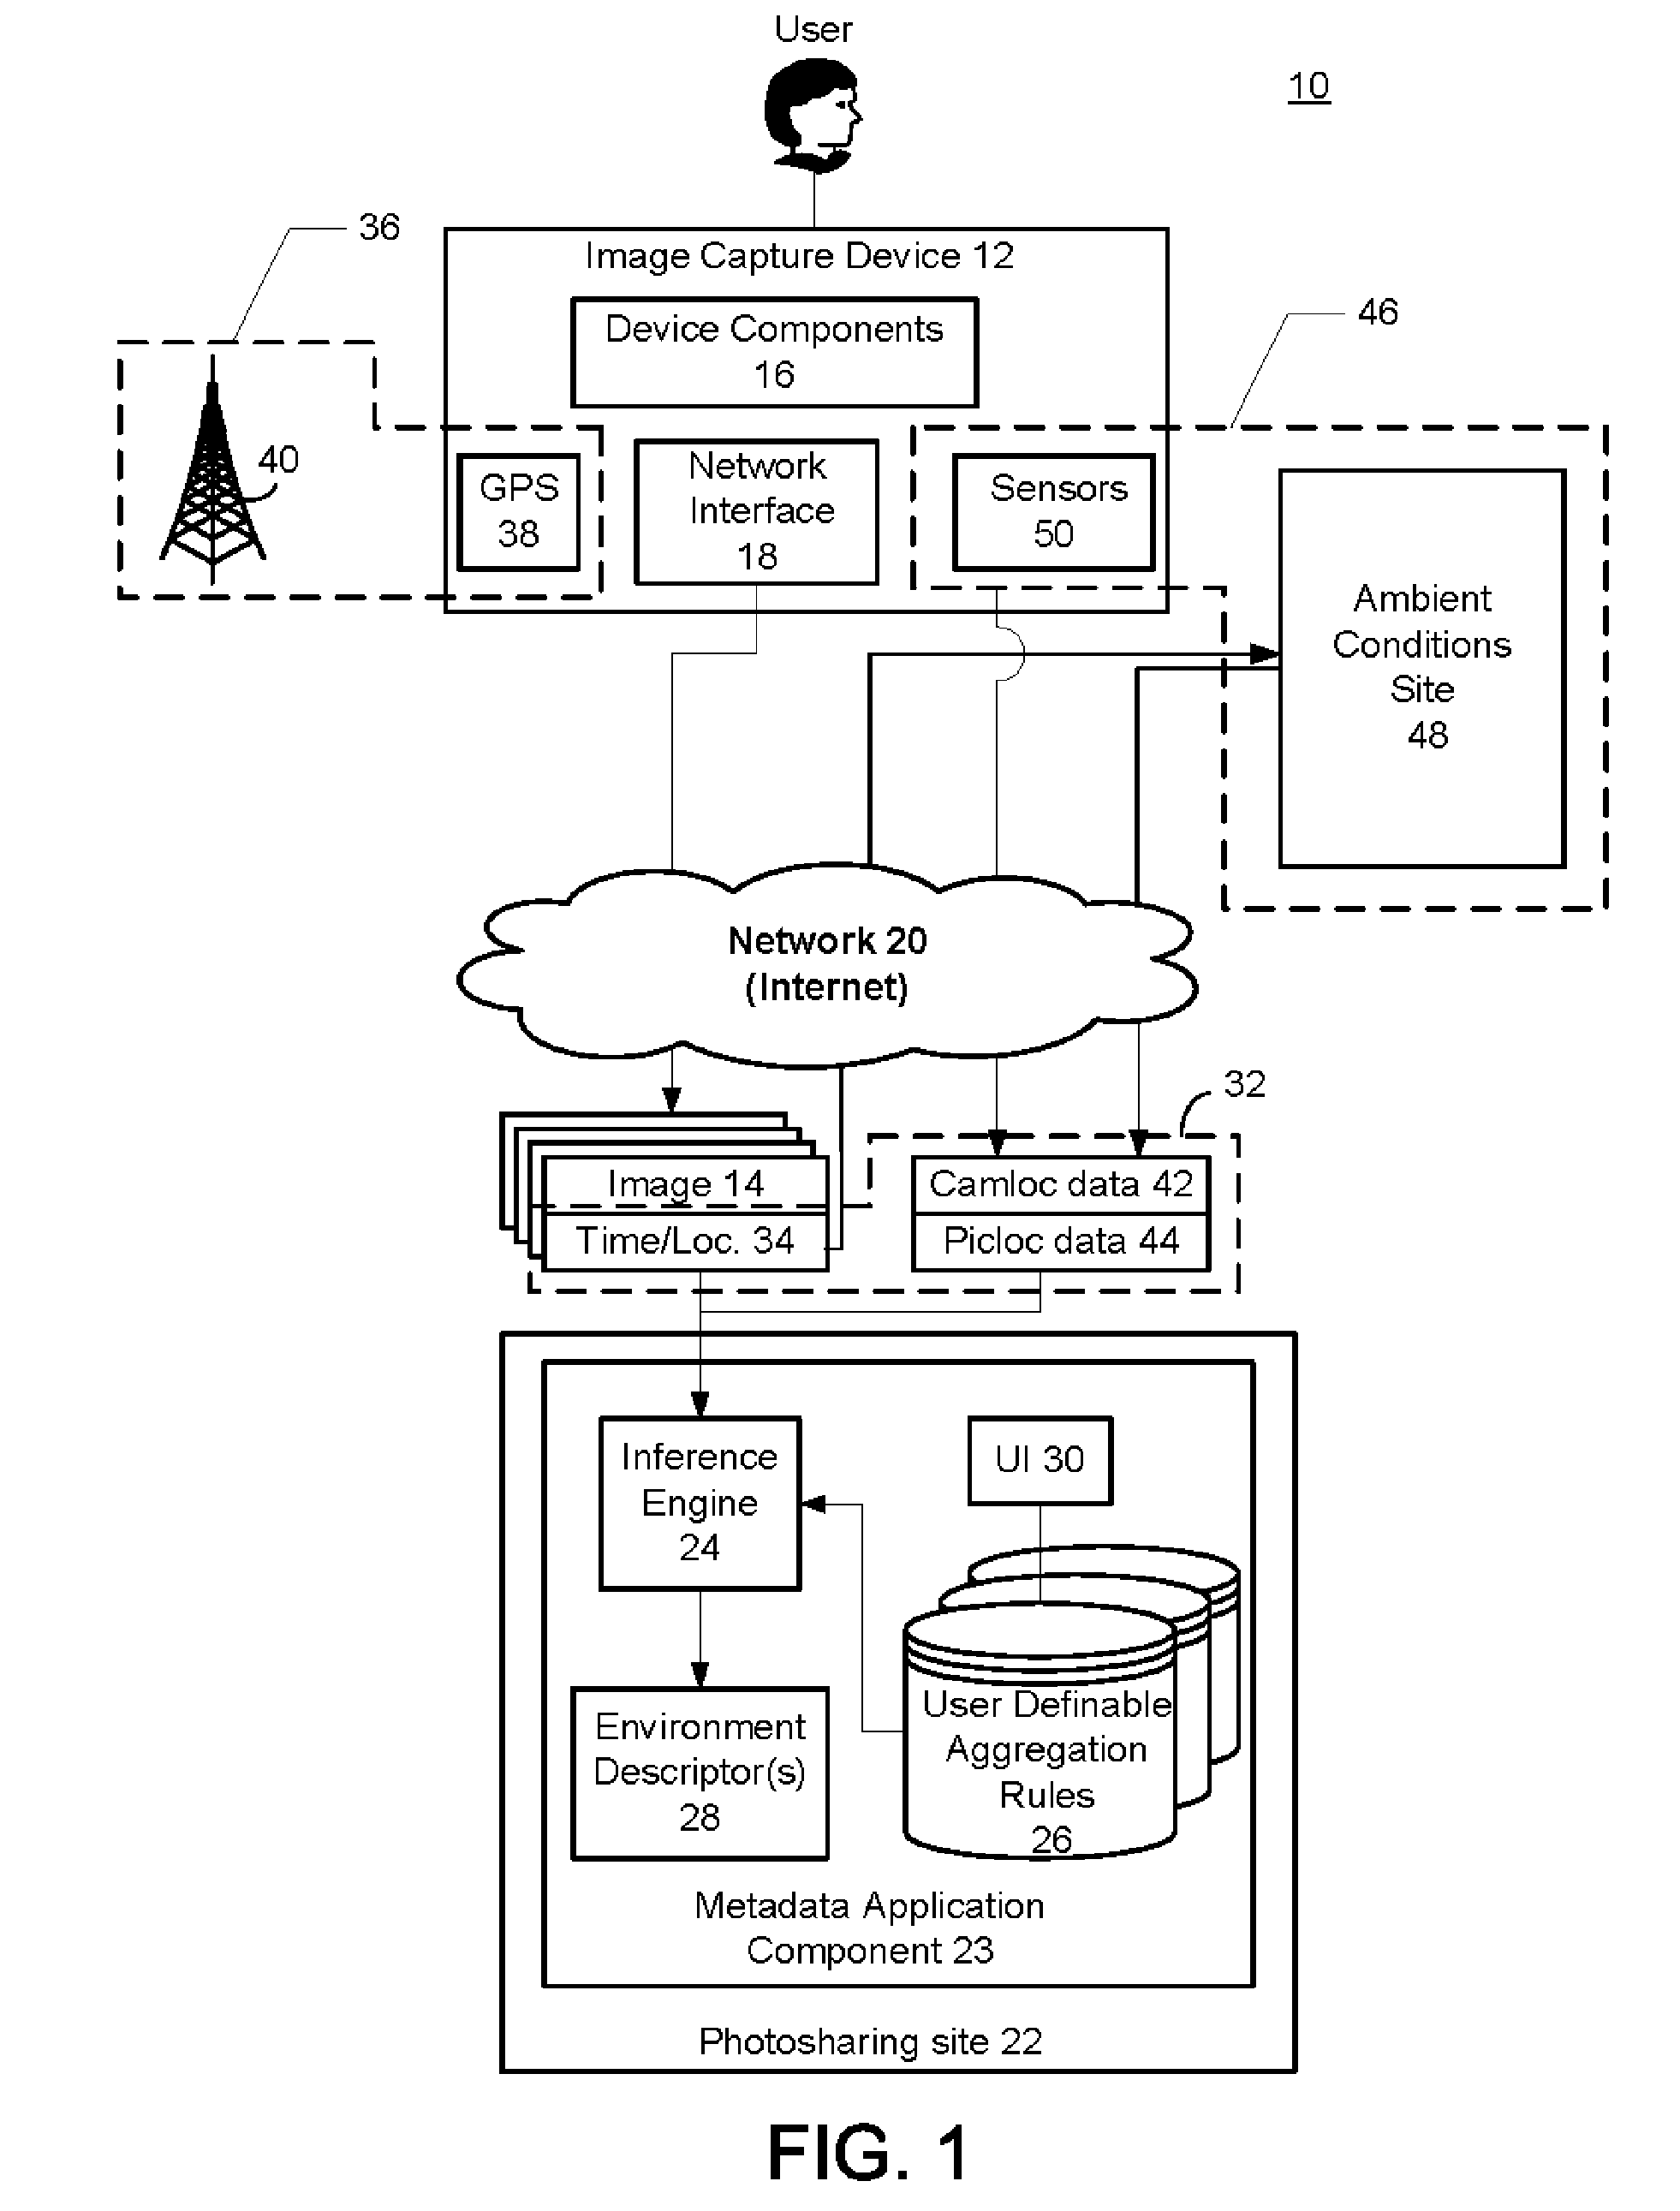 Automatic Generation Of Metadata For A Digital Image Based On Ambient Conditions